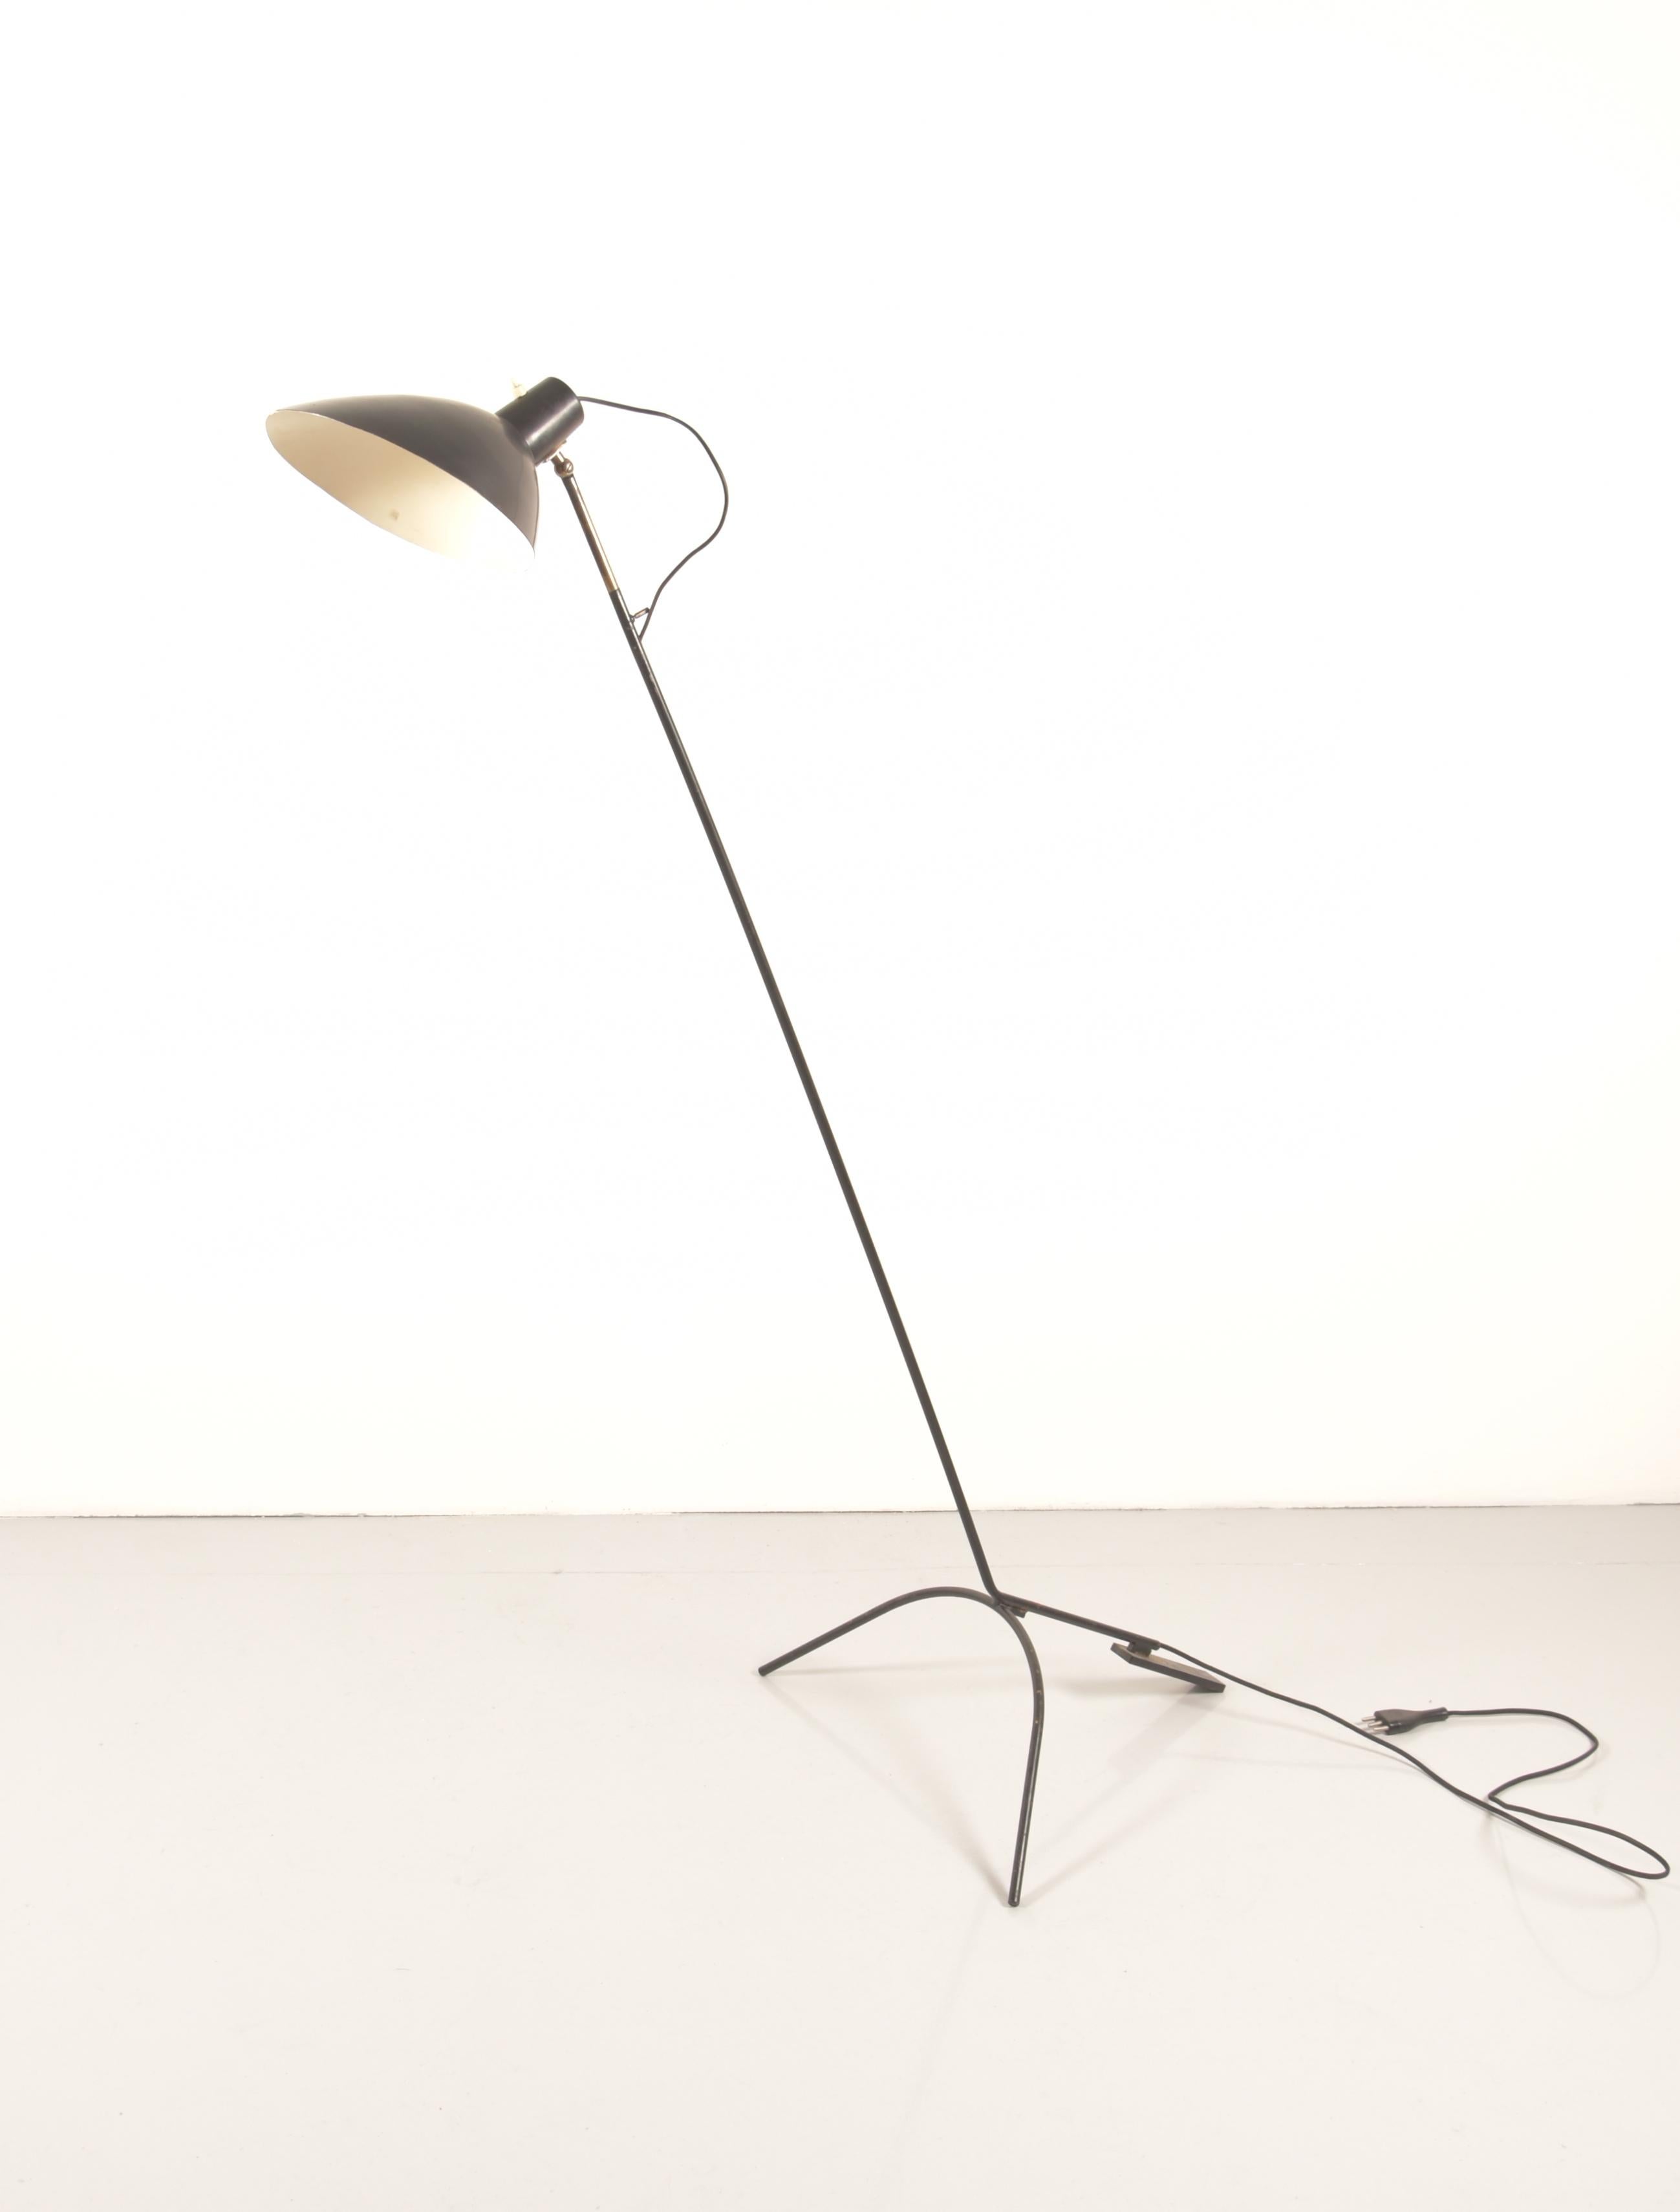 Floor lamp Vittoriano Vigano by Arteluce , circa 1951, model 1047 with black lacquered aluminum adjustable shade on brass stem and tripod base, with original manufacturer's label inside the shade 